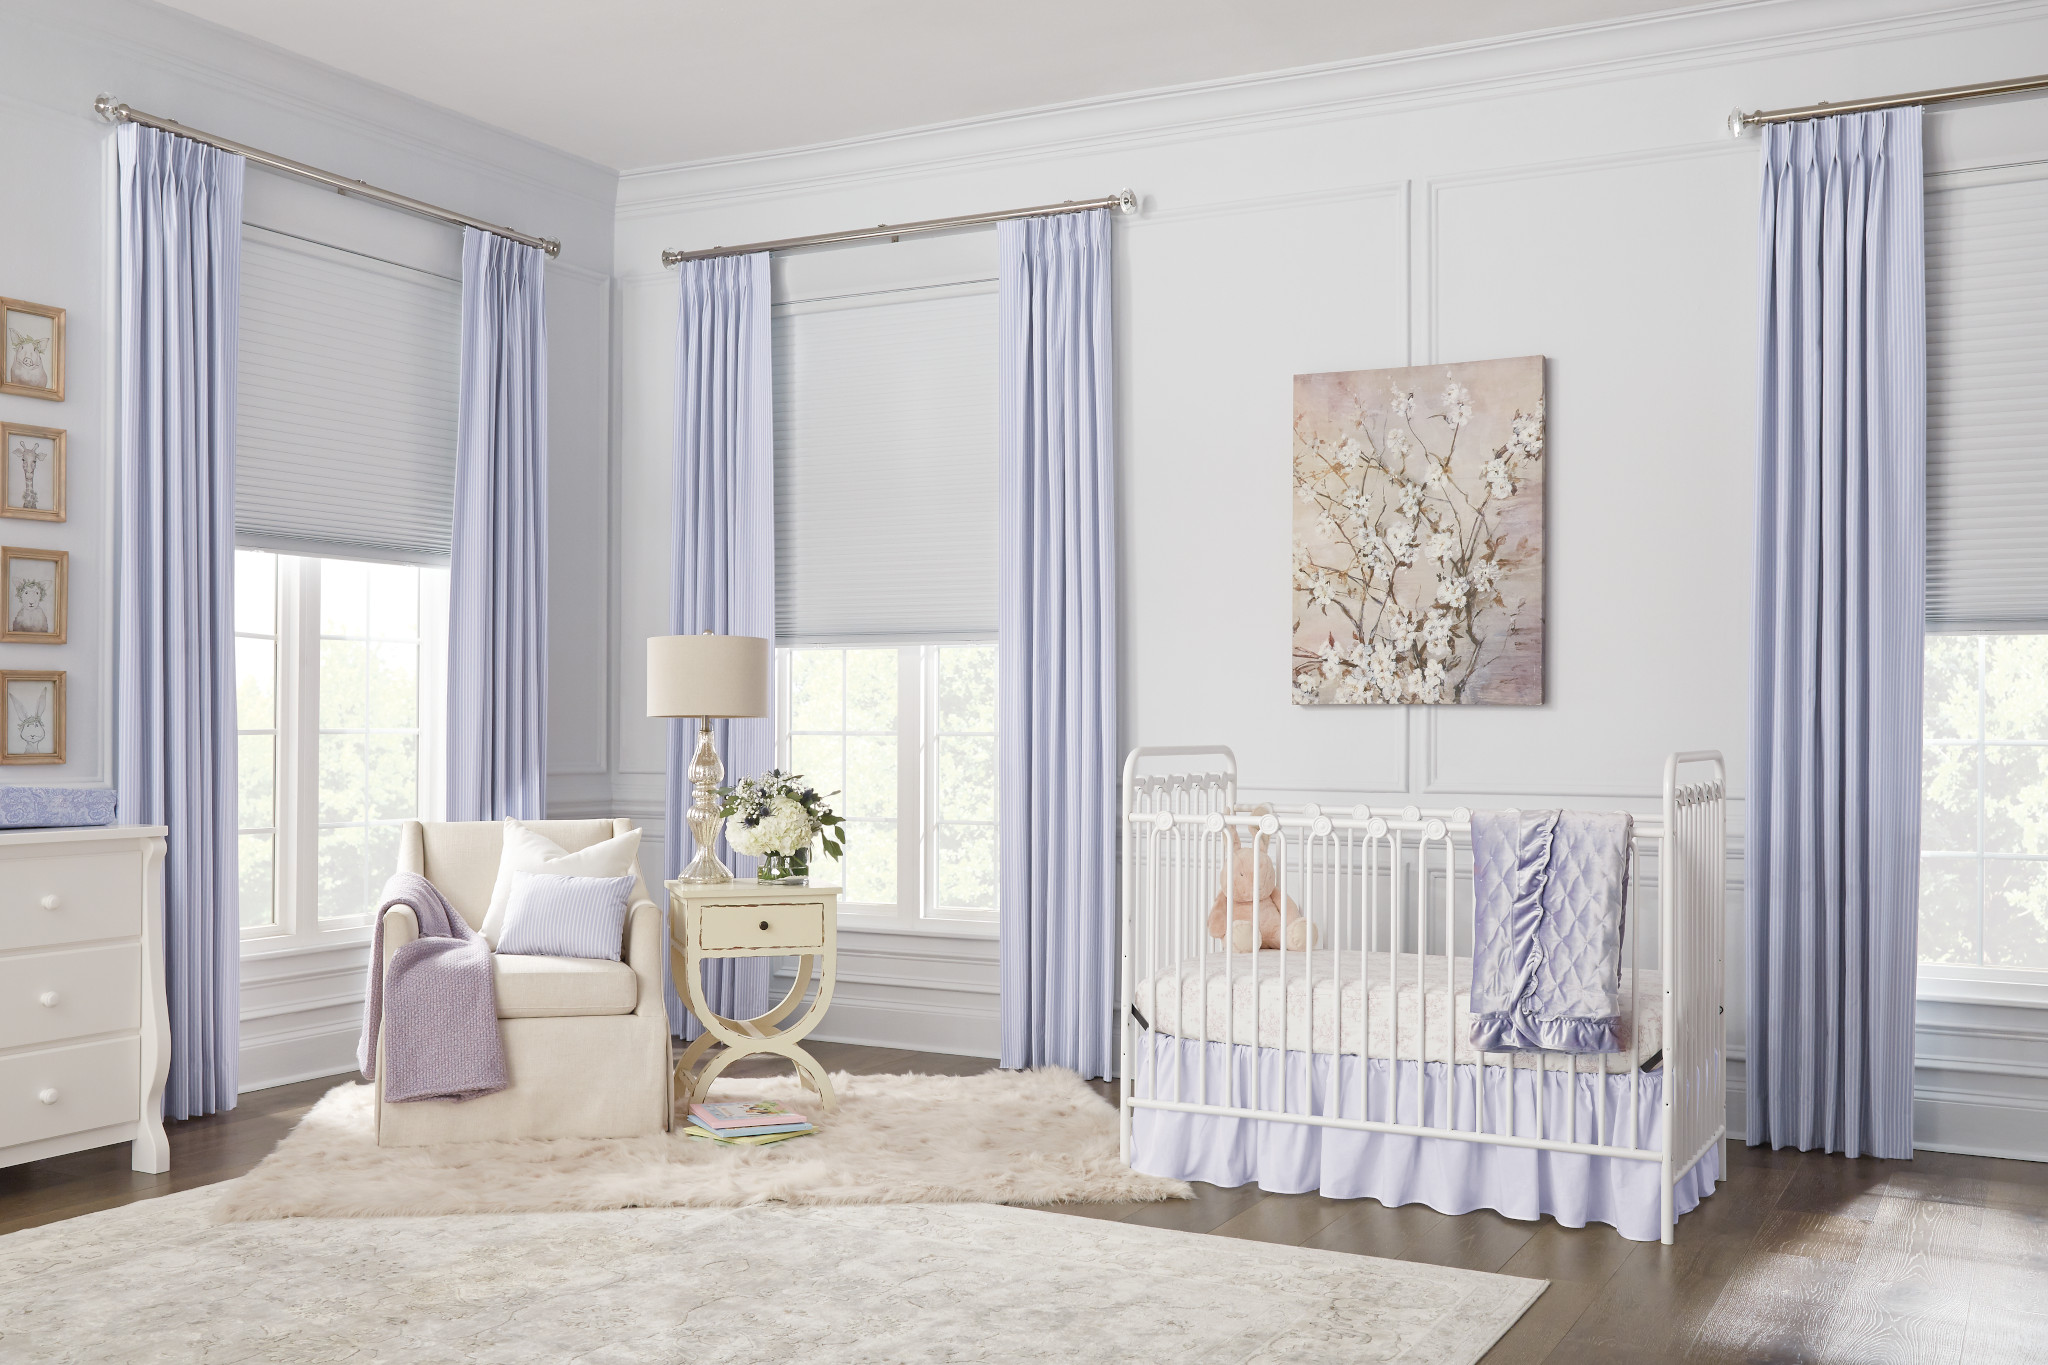 image of nursery with safe window treatments